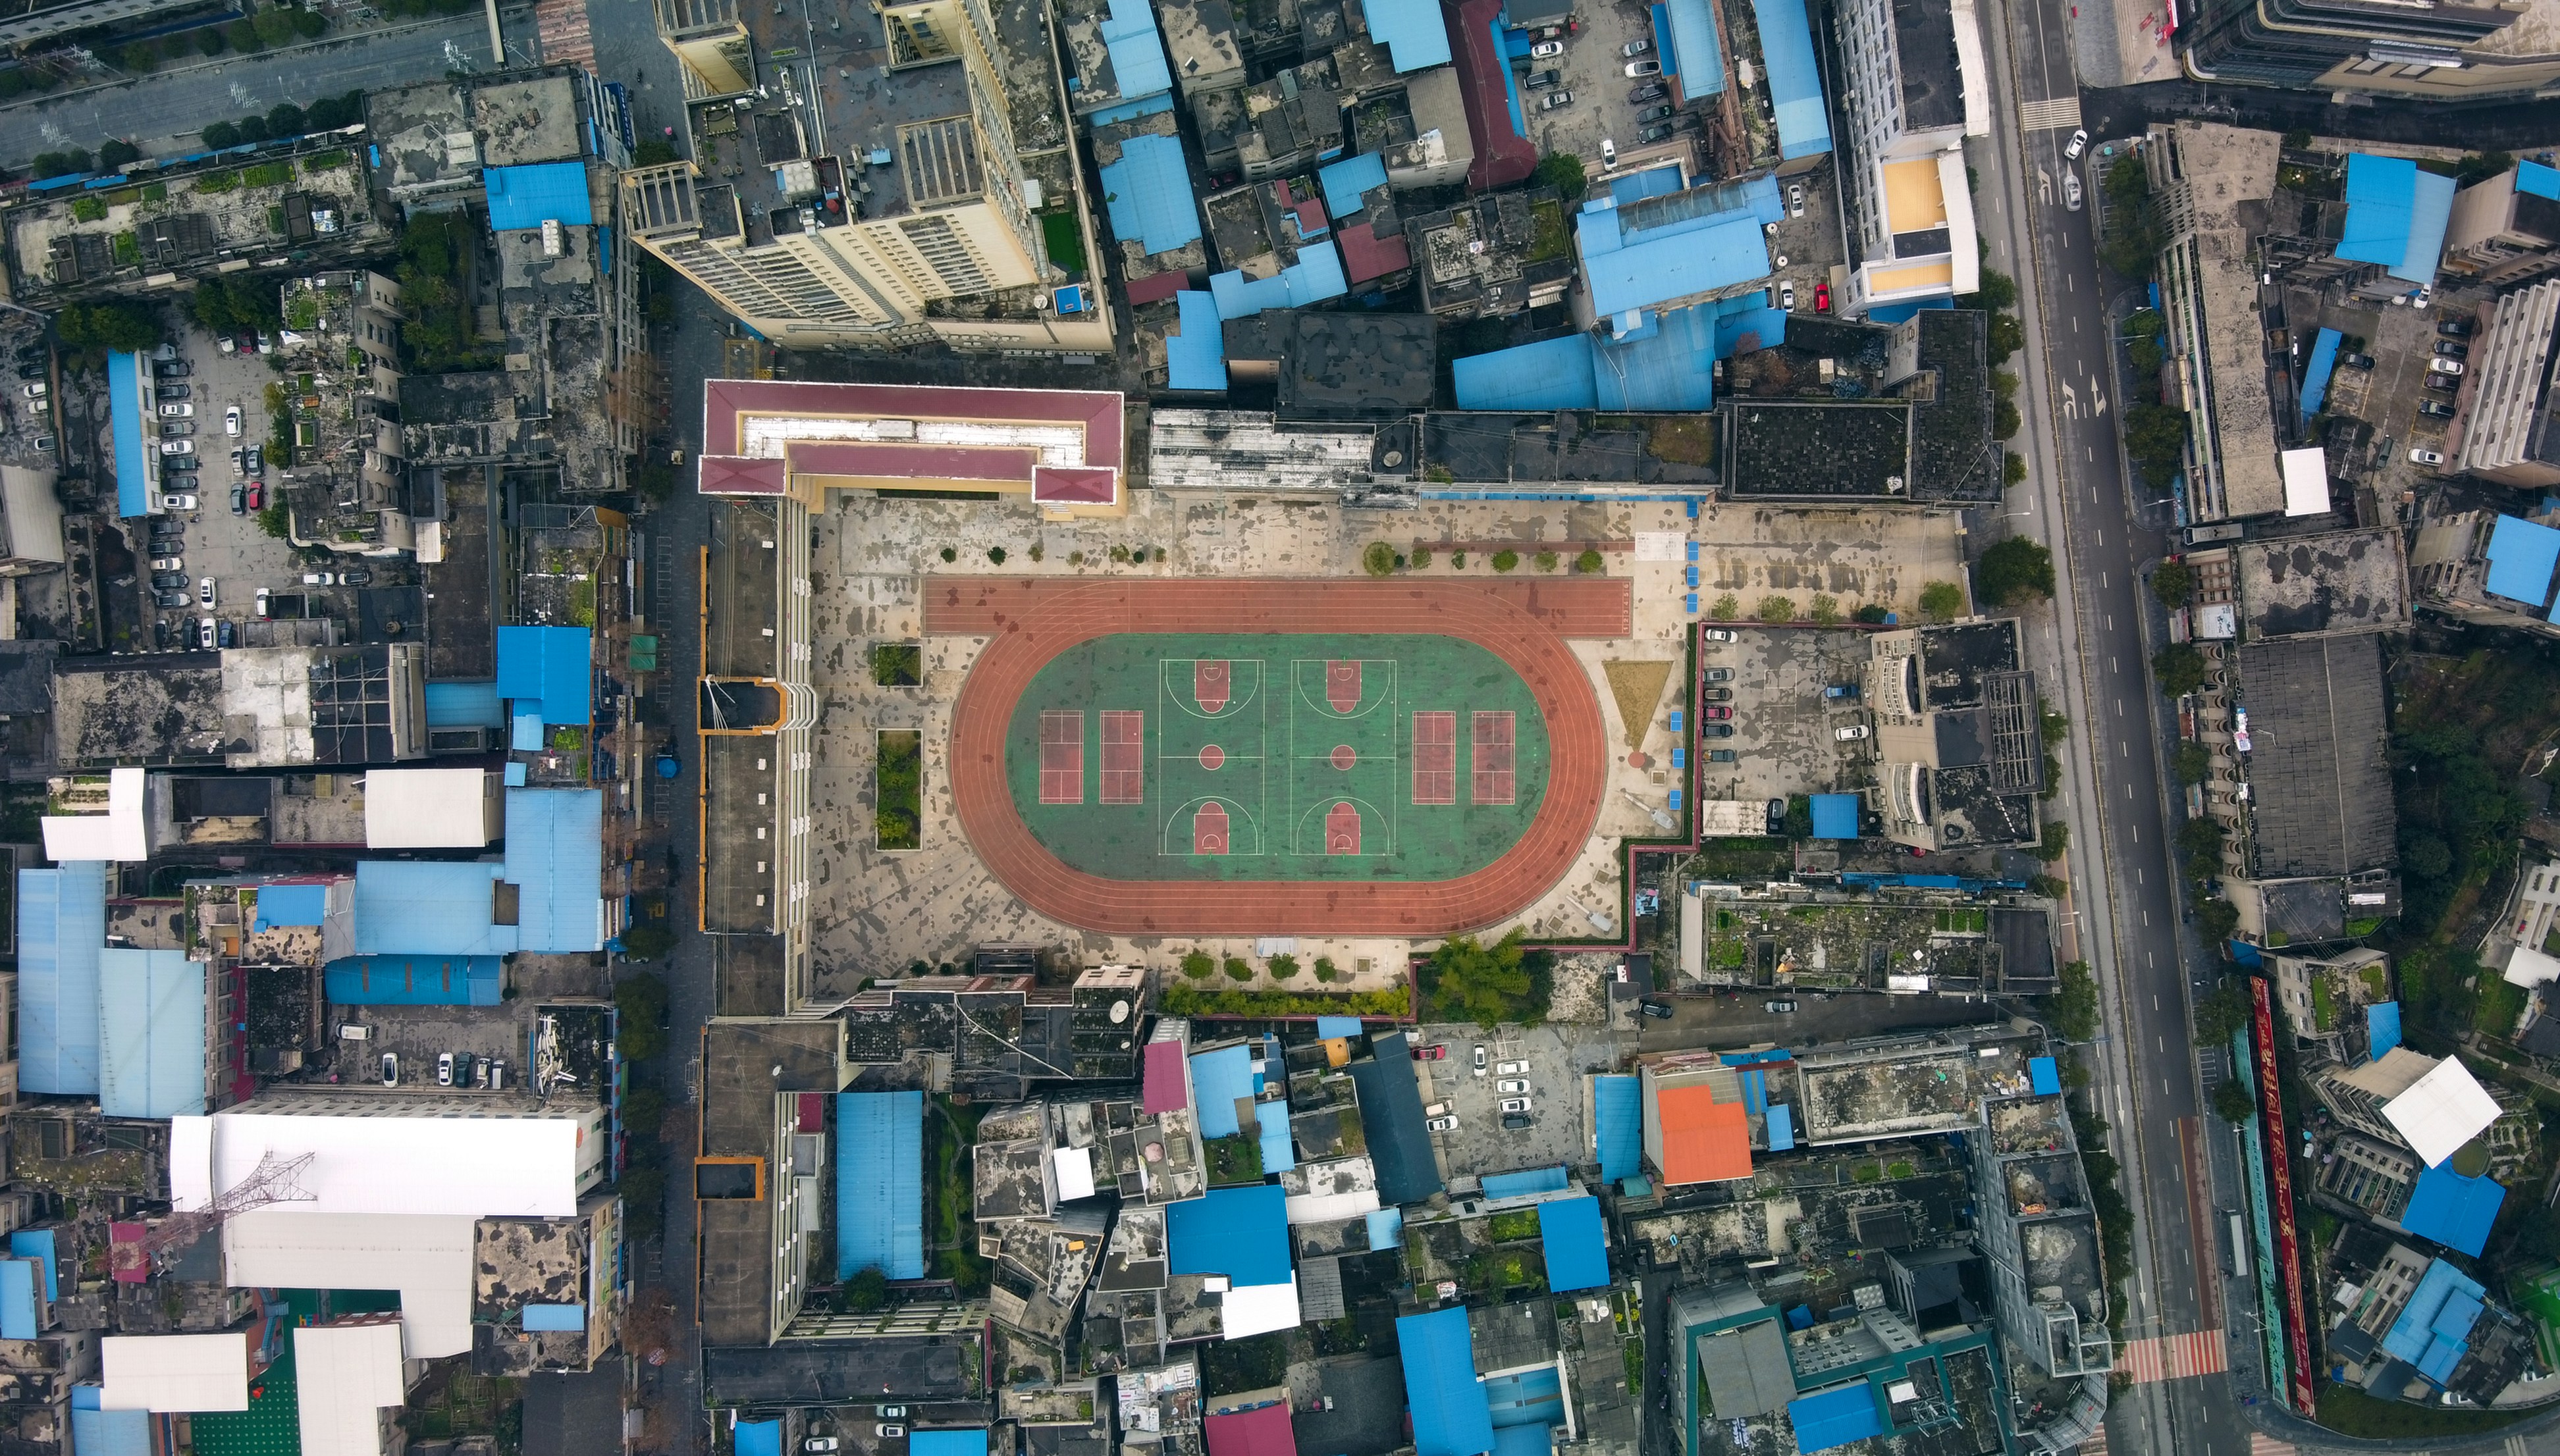 An aerial view of an elementary school in the city of Laifeng, Hubei, China. Shot on DJI Mavic Mini, ISO100, 1/8. Edited using Photoshop.